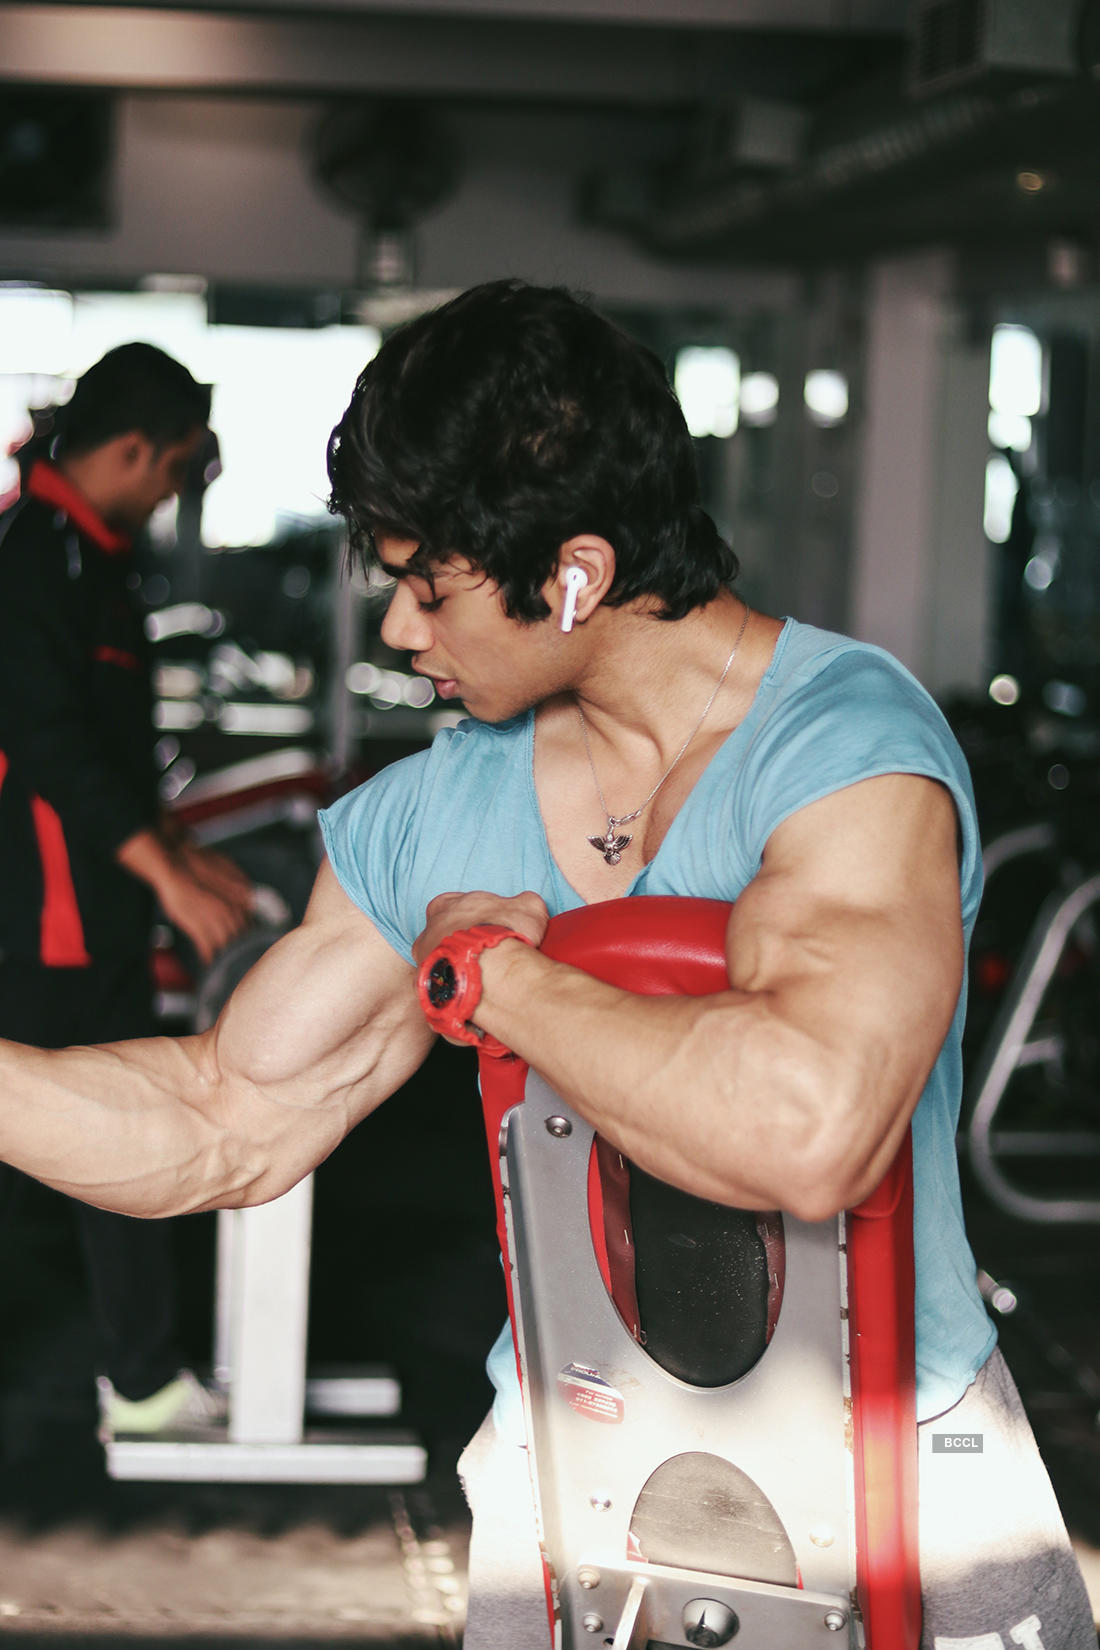 Fitness enthusiast Vasu Mittal opens up on use of steroids in bodybuilding...